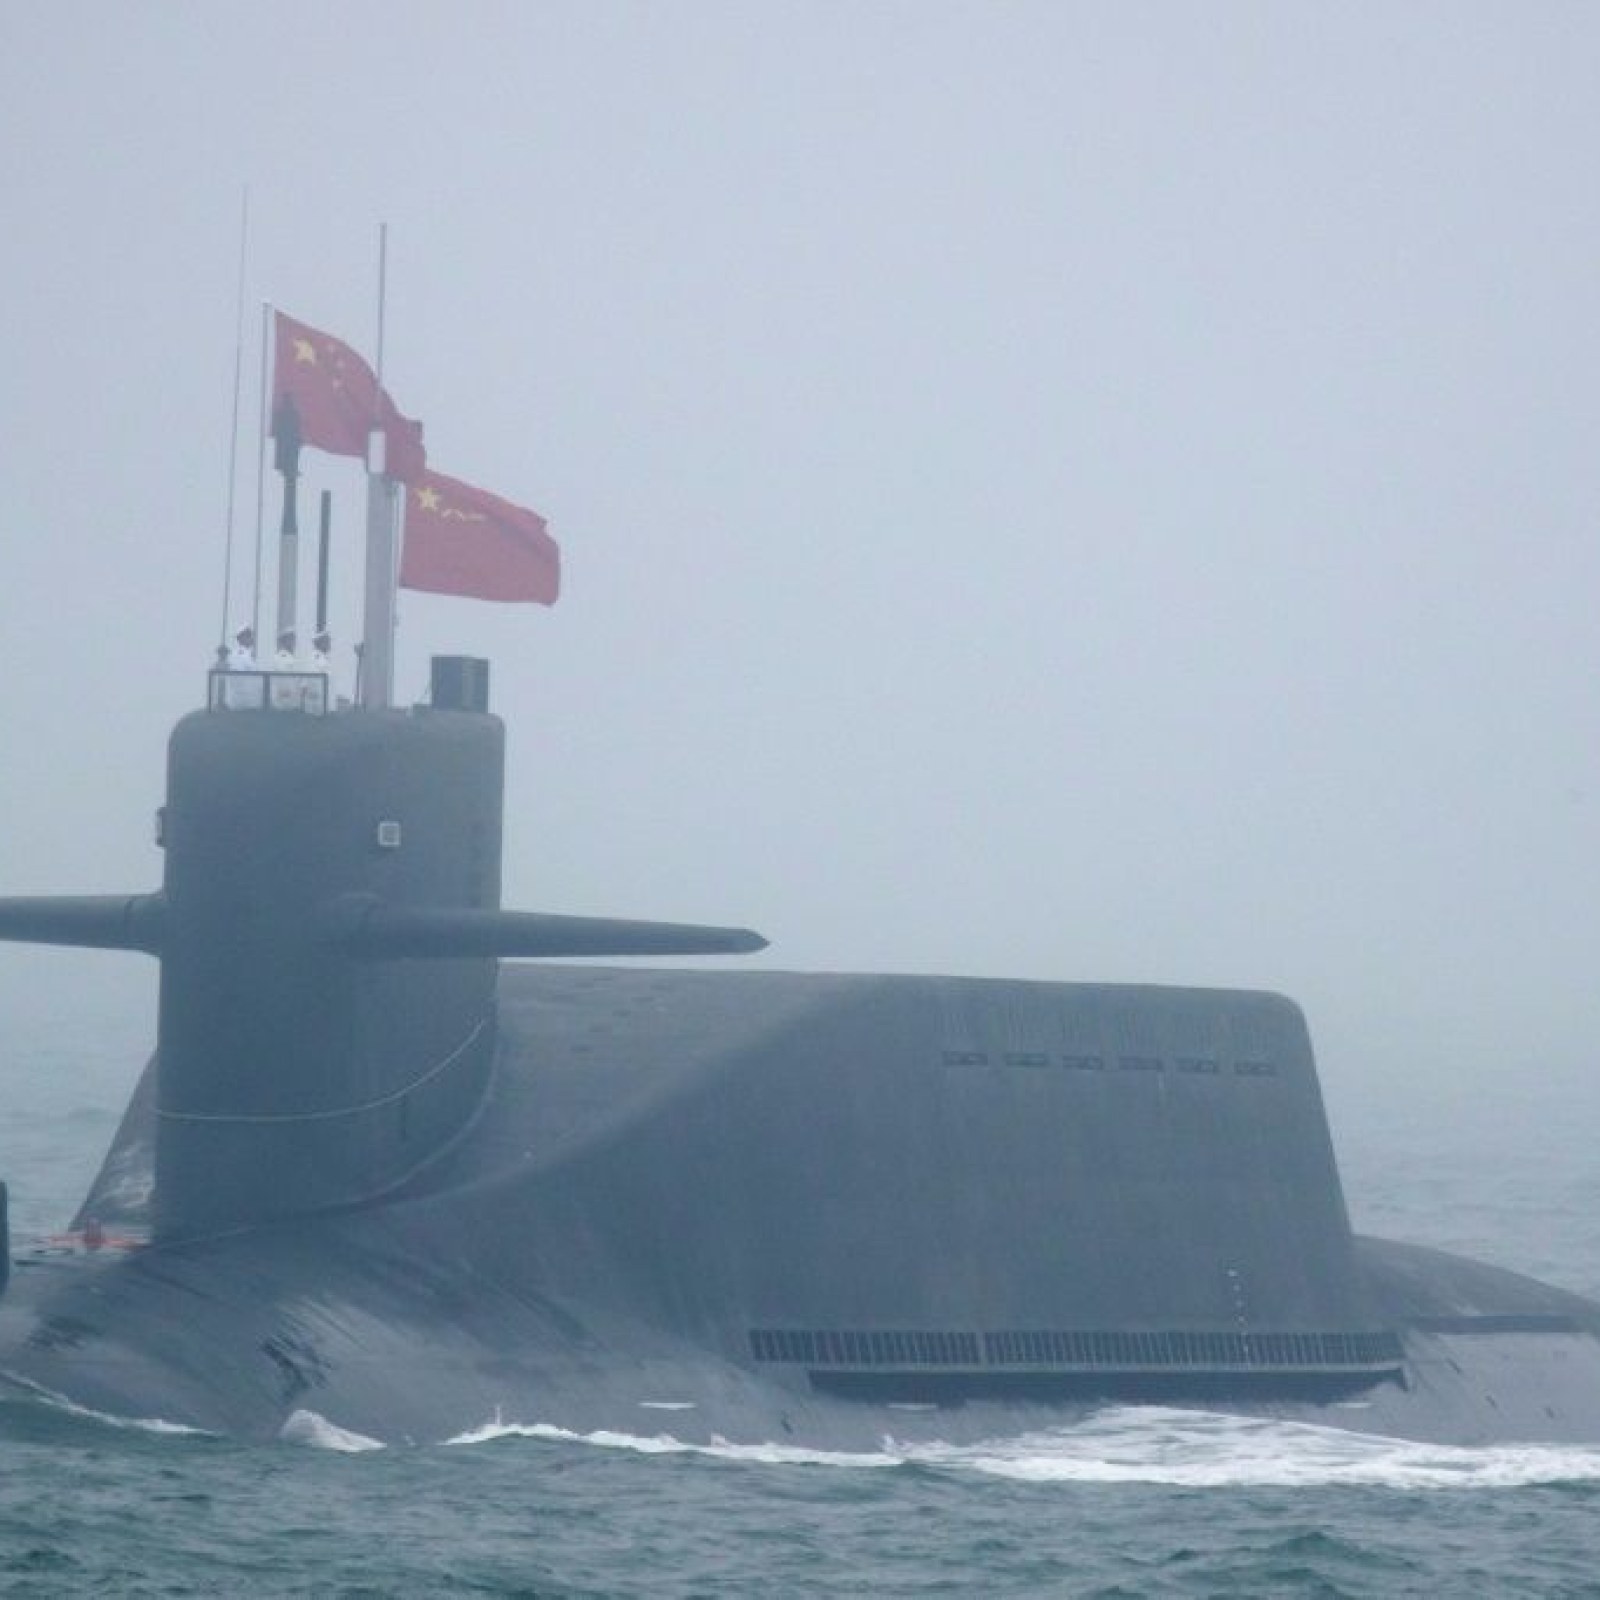 094a-jin-class-nuclear-submarine-long-march-10-chinese-peoples-liberation-army-pla-navy.jpg